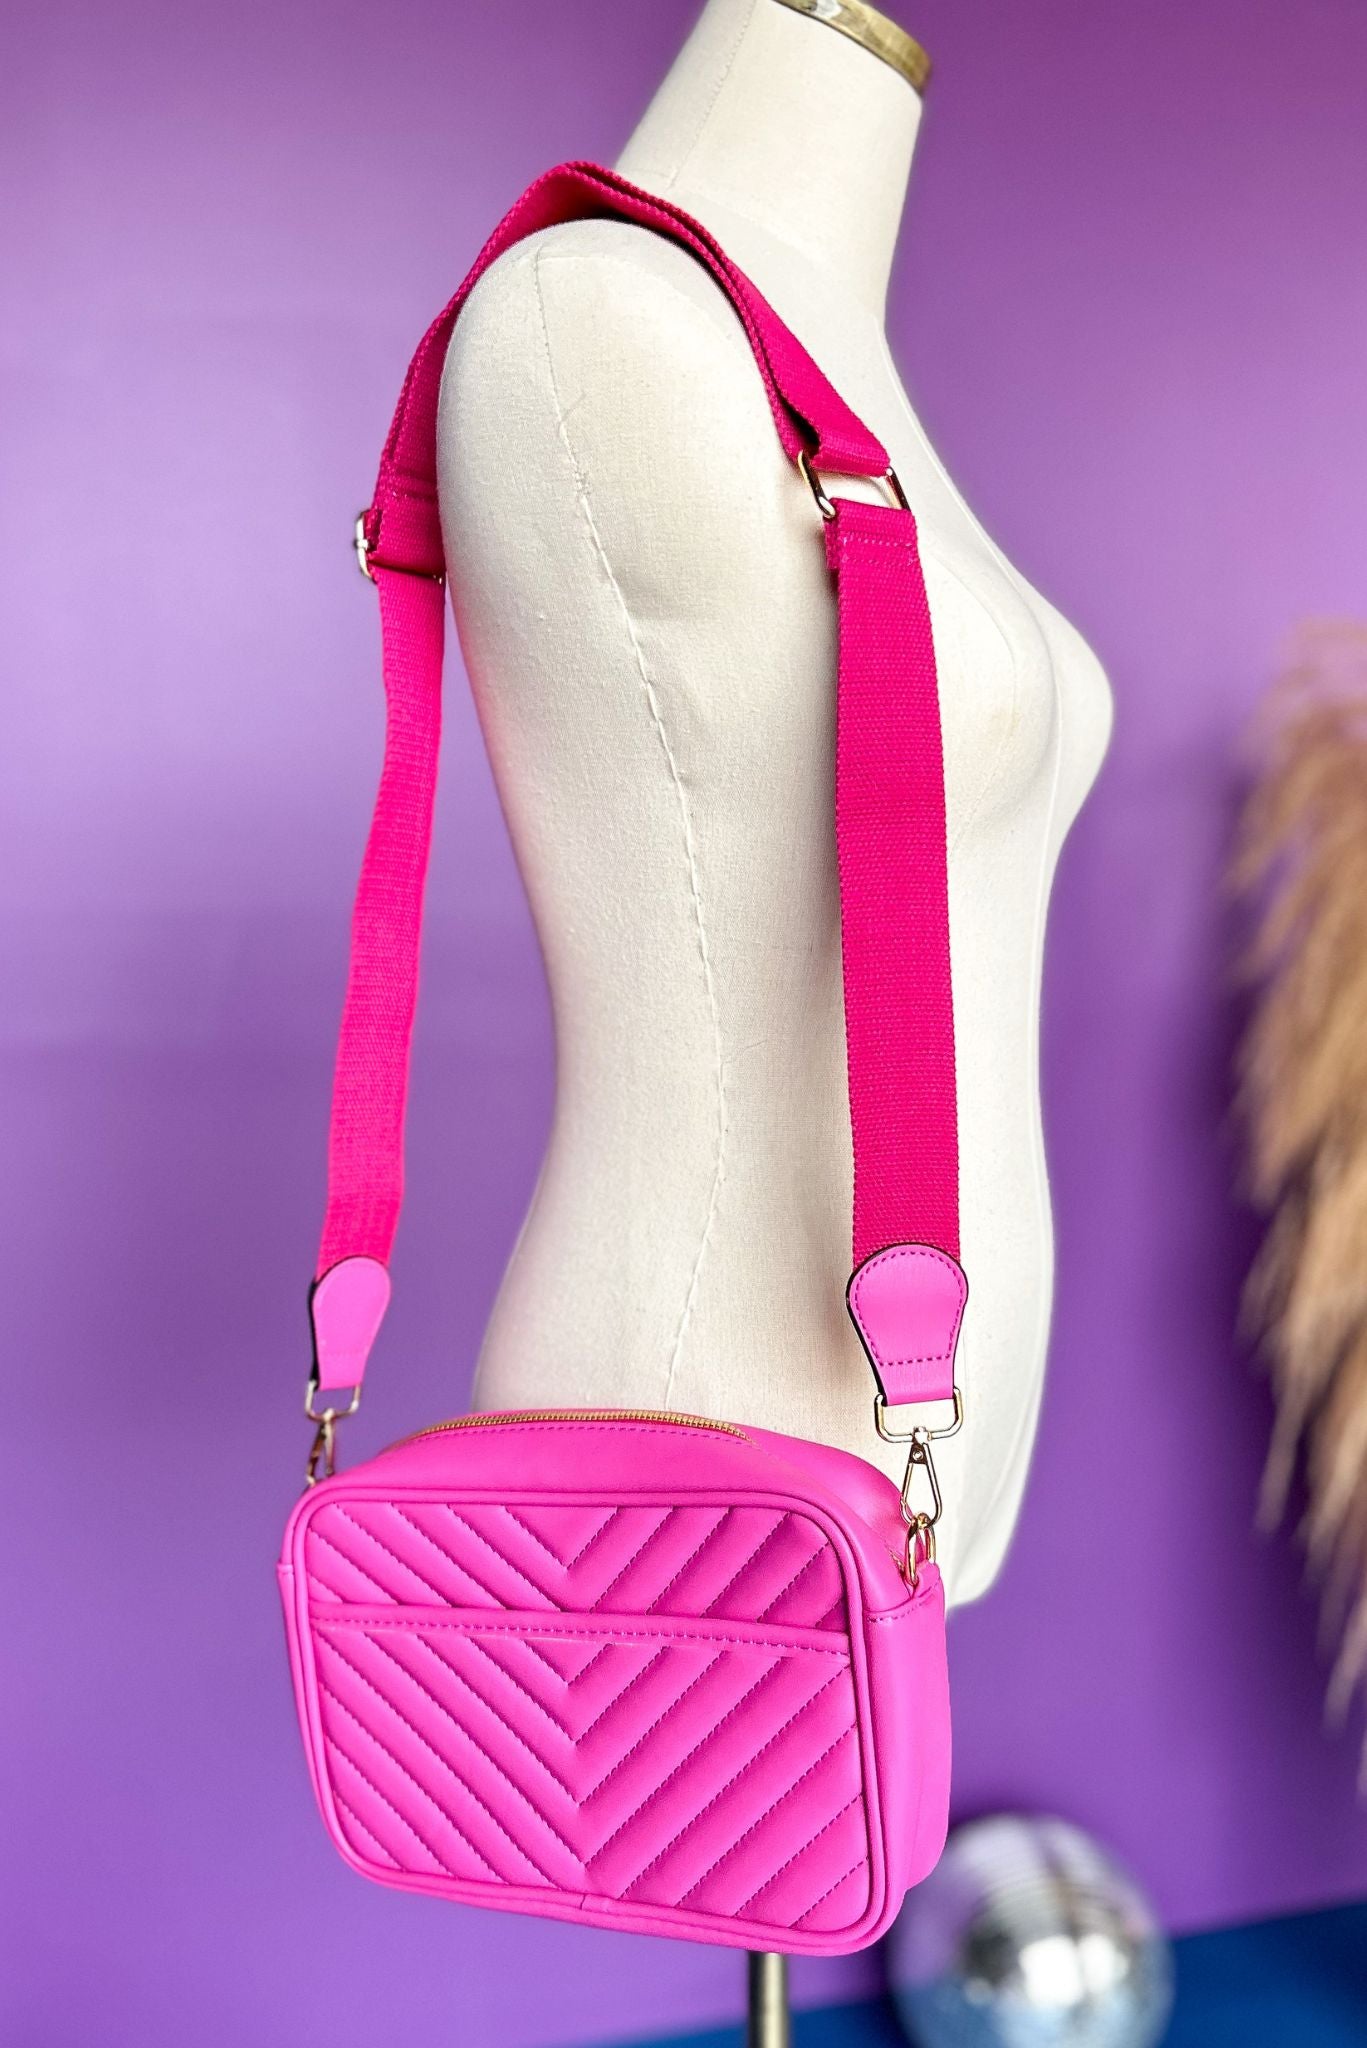 Fuchsia Chevron Patterned Rectangle Crossbody Bag, accessory, bag, elevated bag, shop style your senses by mallory fitzsimmons